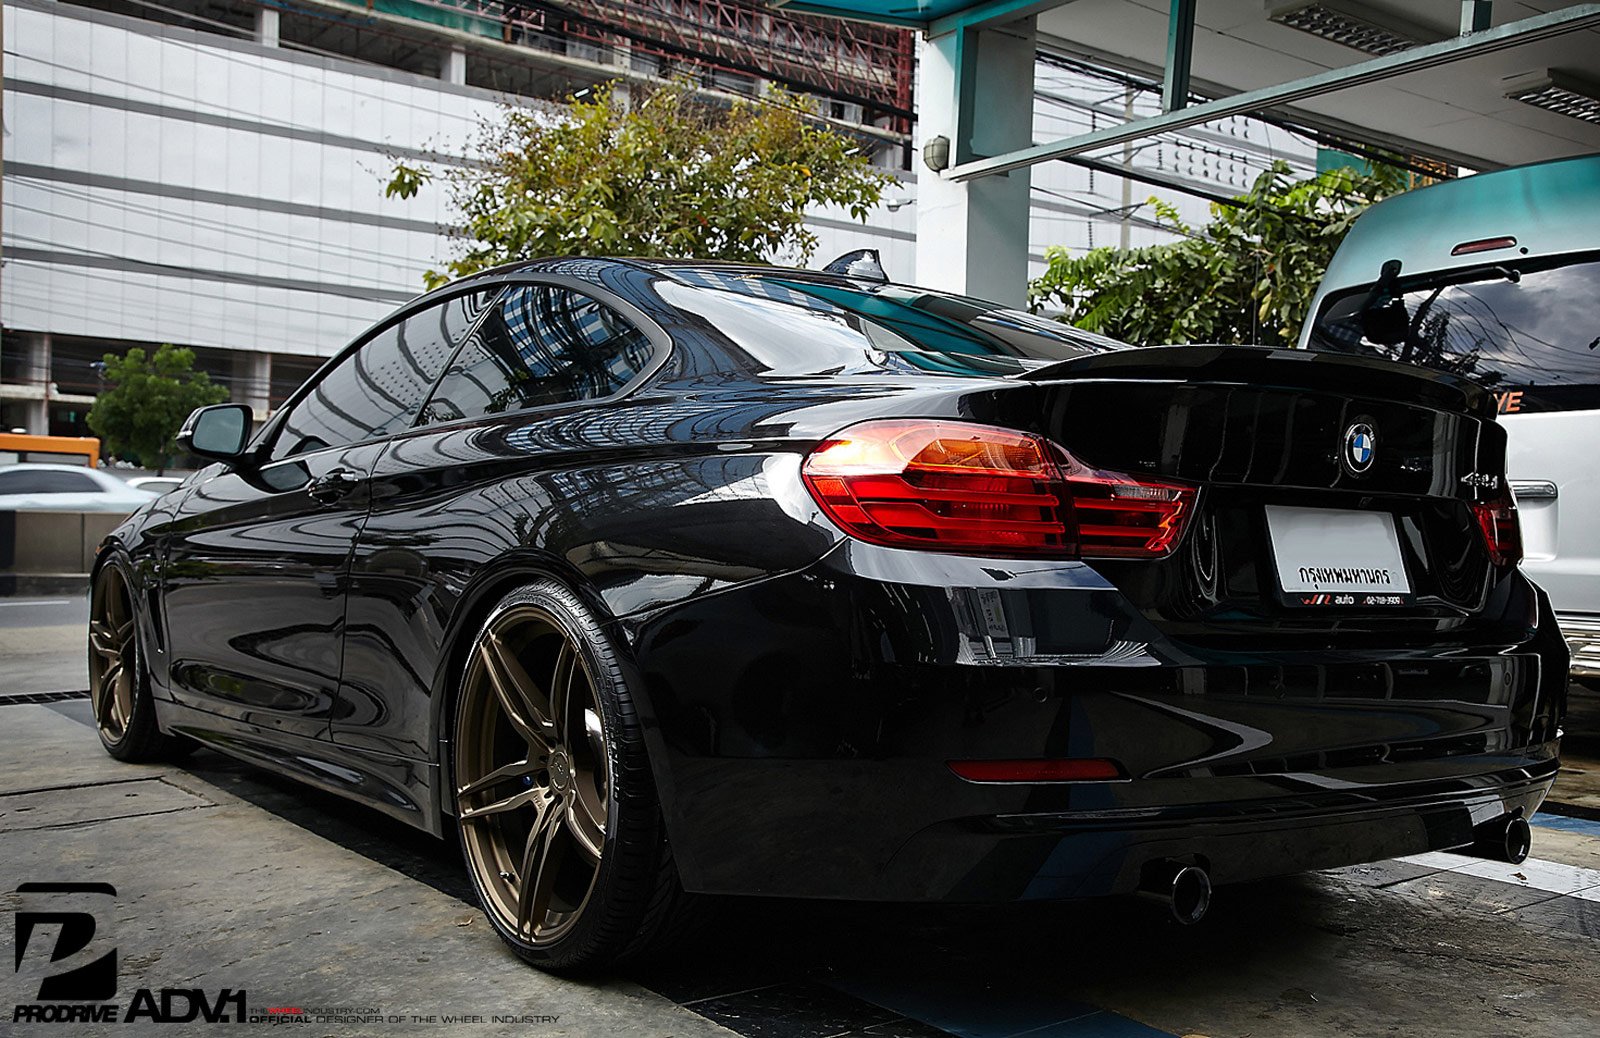 adv1, Wheels, Bmw, F32, 435i, Coupe, Tuning, Cars Wallpaper